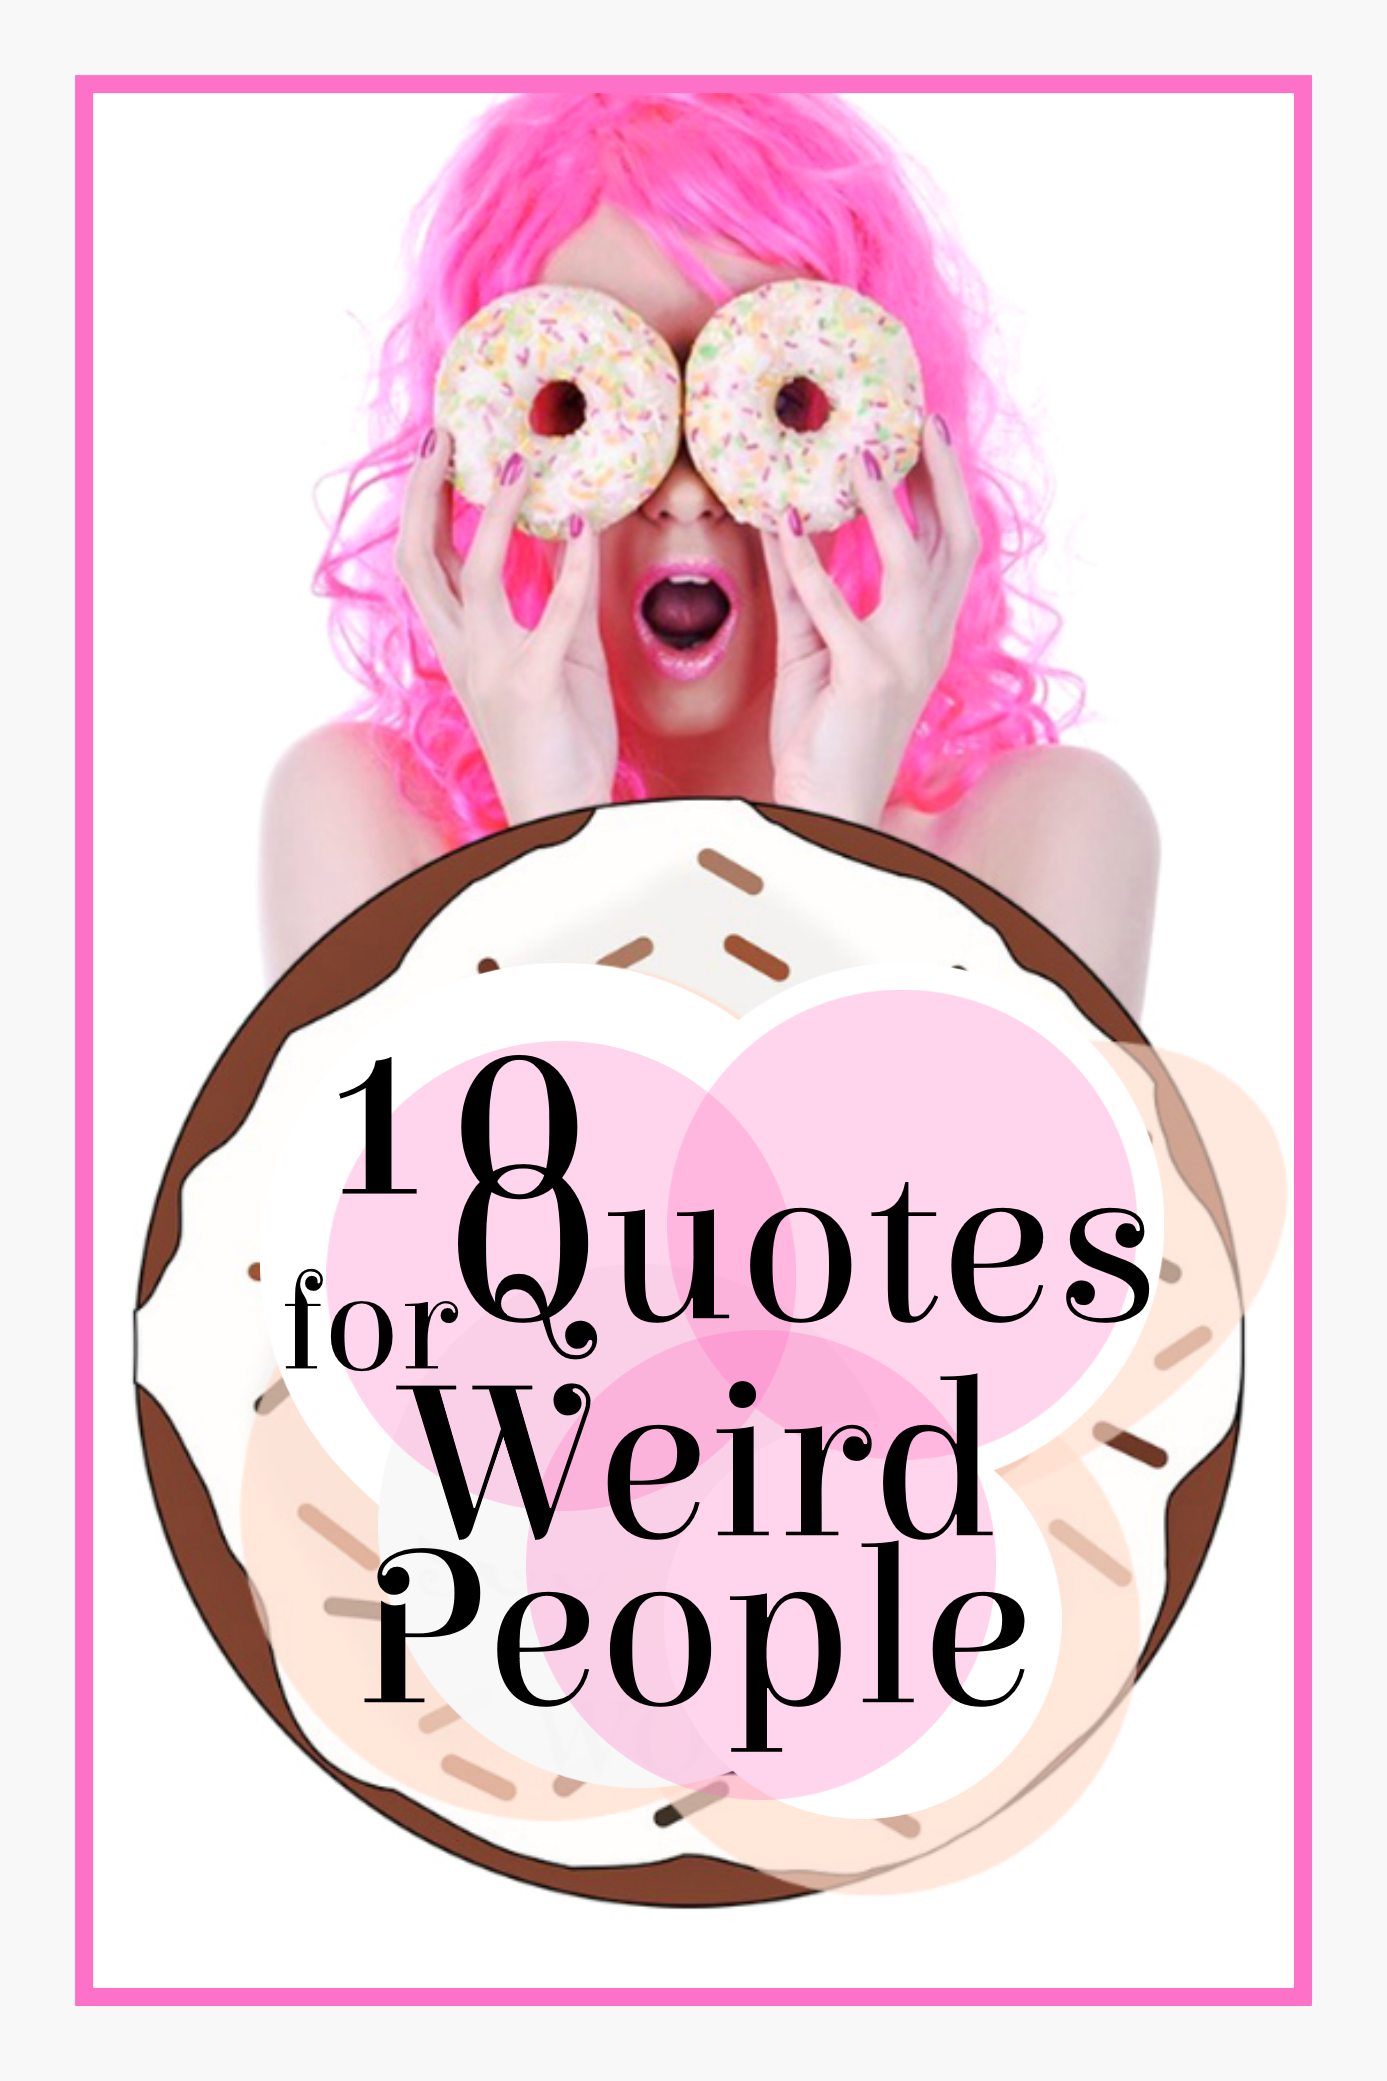 10 Quotes for weird and odd people bekitschig.blog